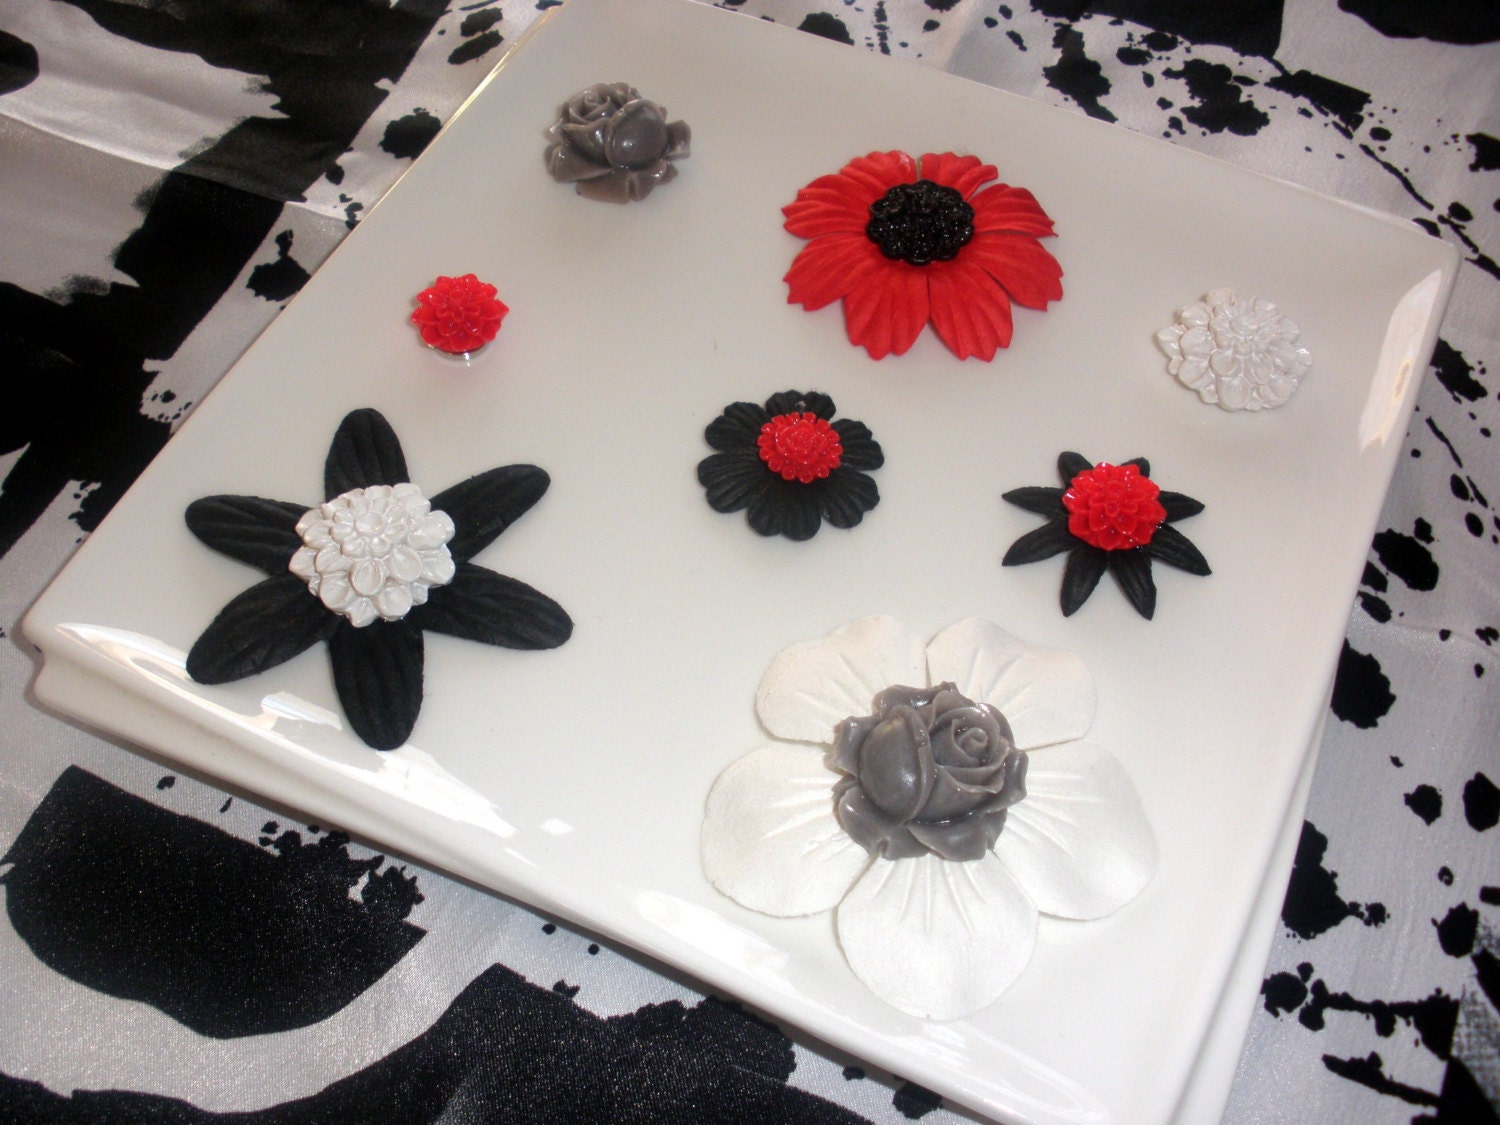 Black & White Red Gray Set of 8 Flower Magnets. Cabochons Prima Petals neo magnets Gorgeous - ChicChicChickadee